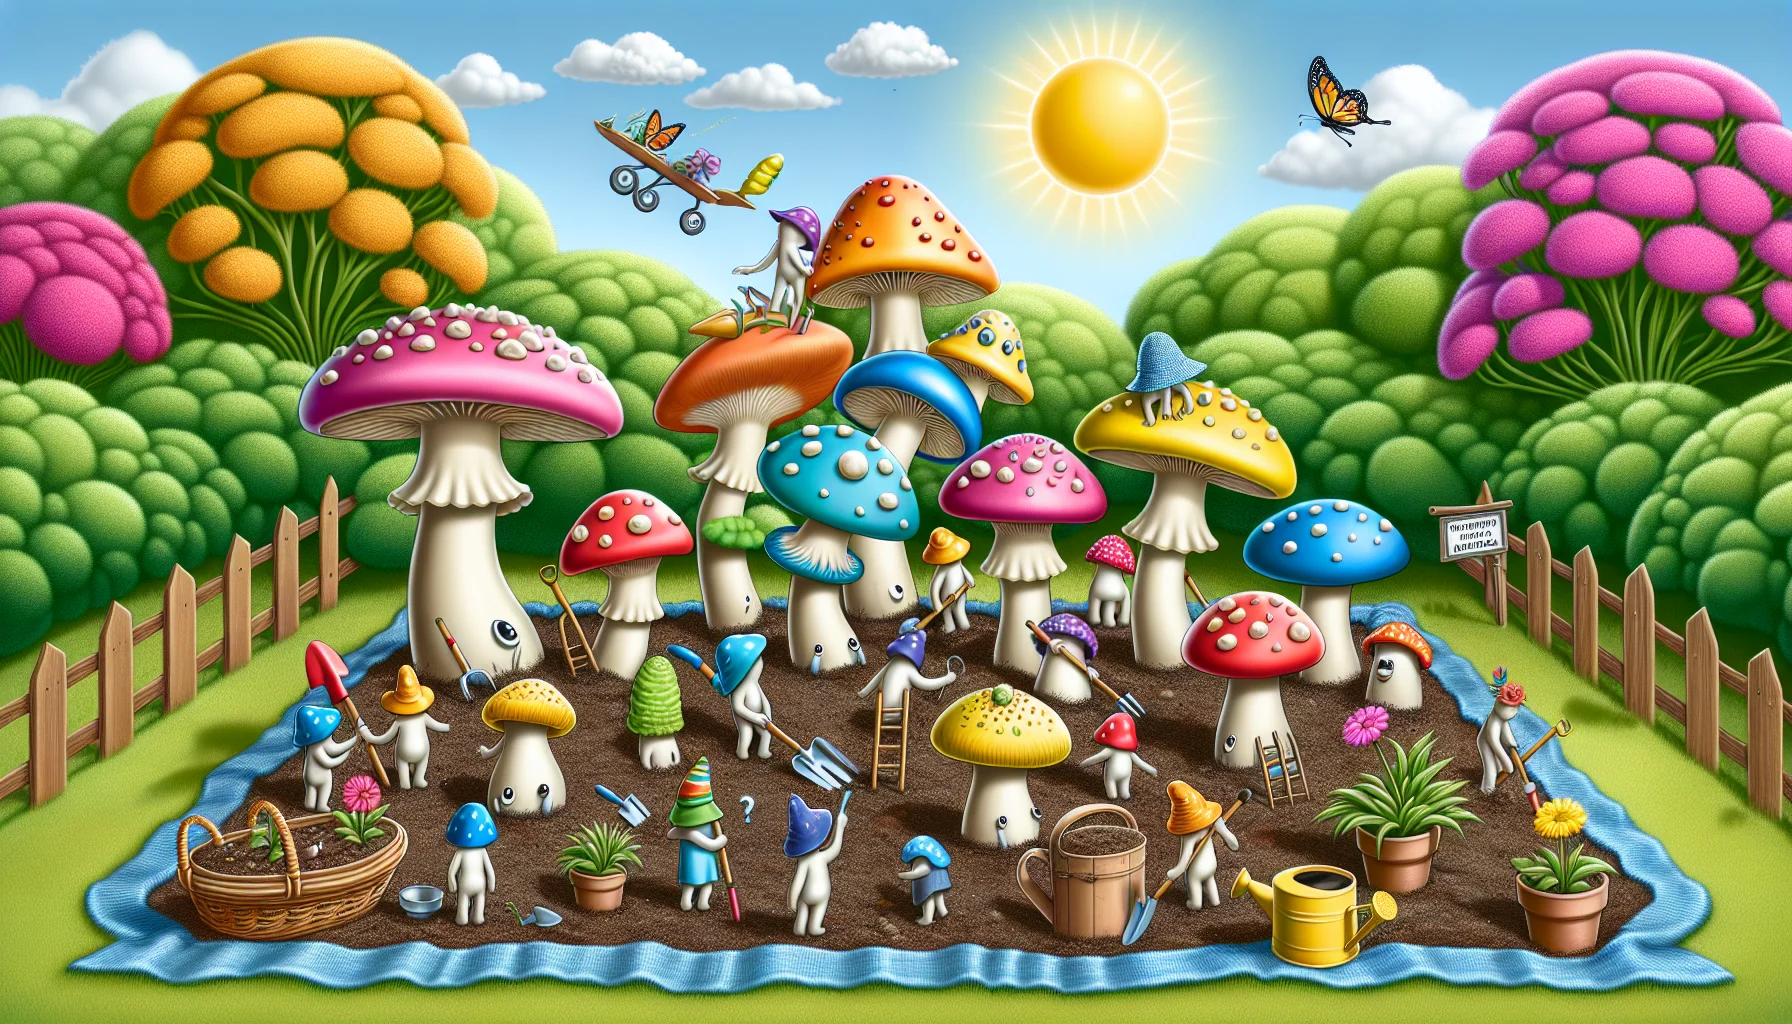 Create an image that depicts a humor-infused scenario in a garden setting. Display an assortment of colorful, amusingly-shaped fungi sprouting from the soil. Integrate elements such as gardening tools playfully being used by tiny, imaginary, well-dressed creatures, each of a different descent - one could be East Asian, another Black, and another Middle Eastern for variety. Further add a bright sun, blue sky, cheerful flowers around, encapsulating the joy of gardening. Please, render in a realistic style.